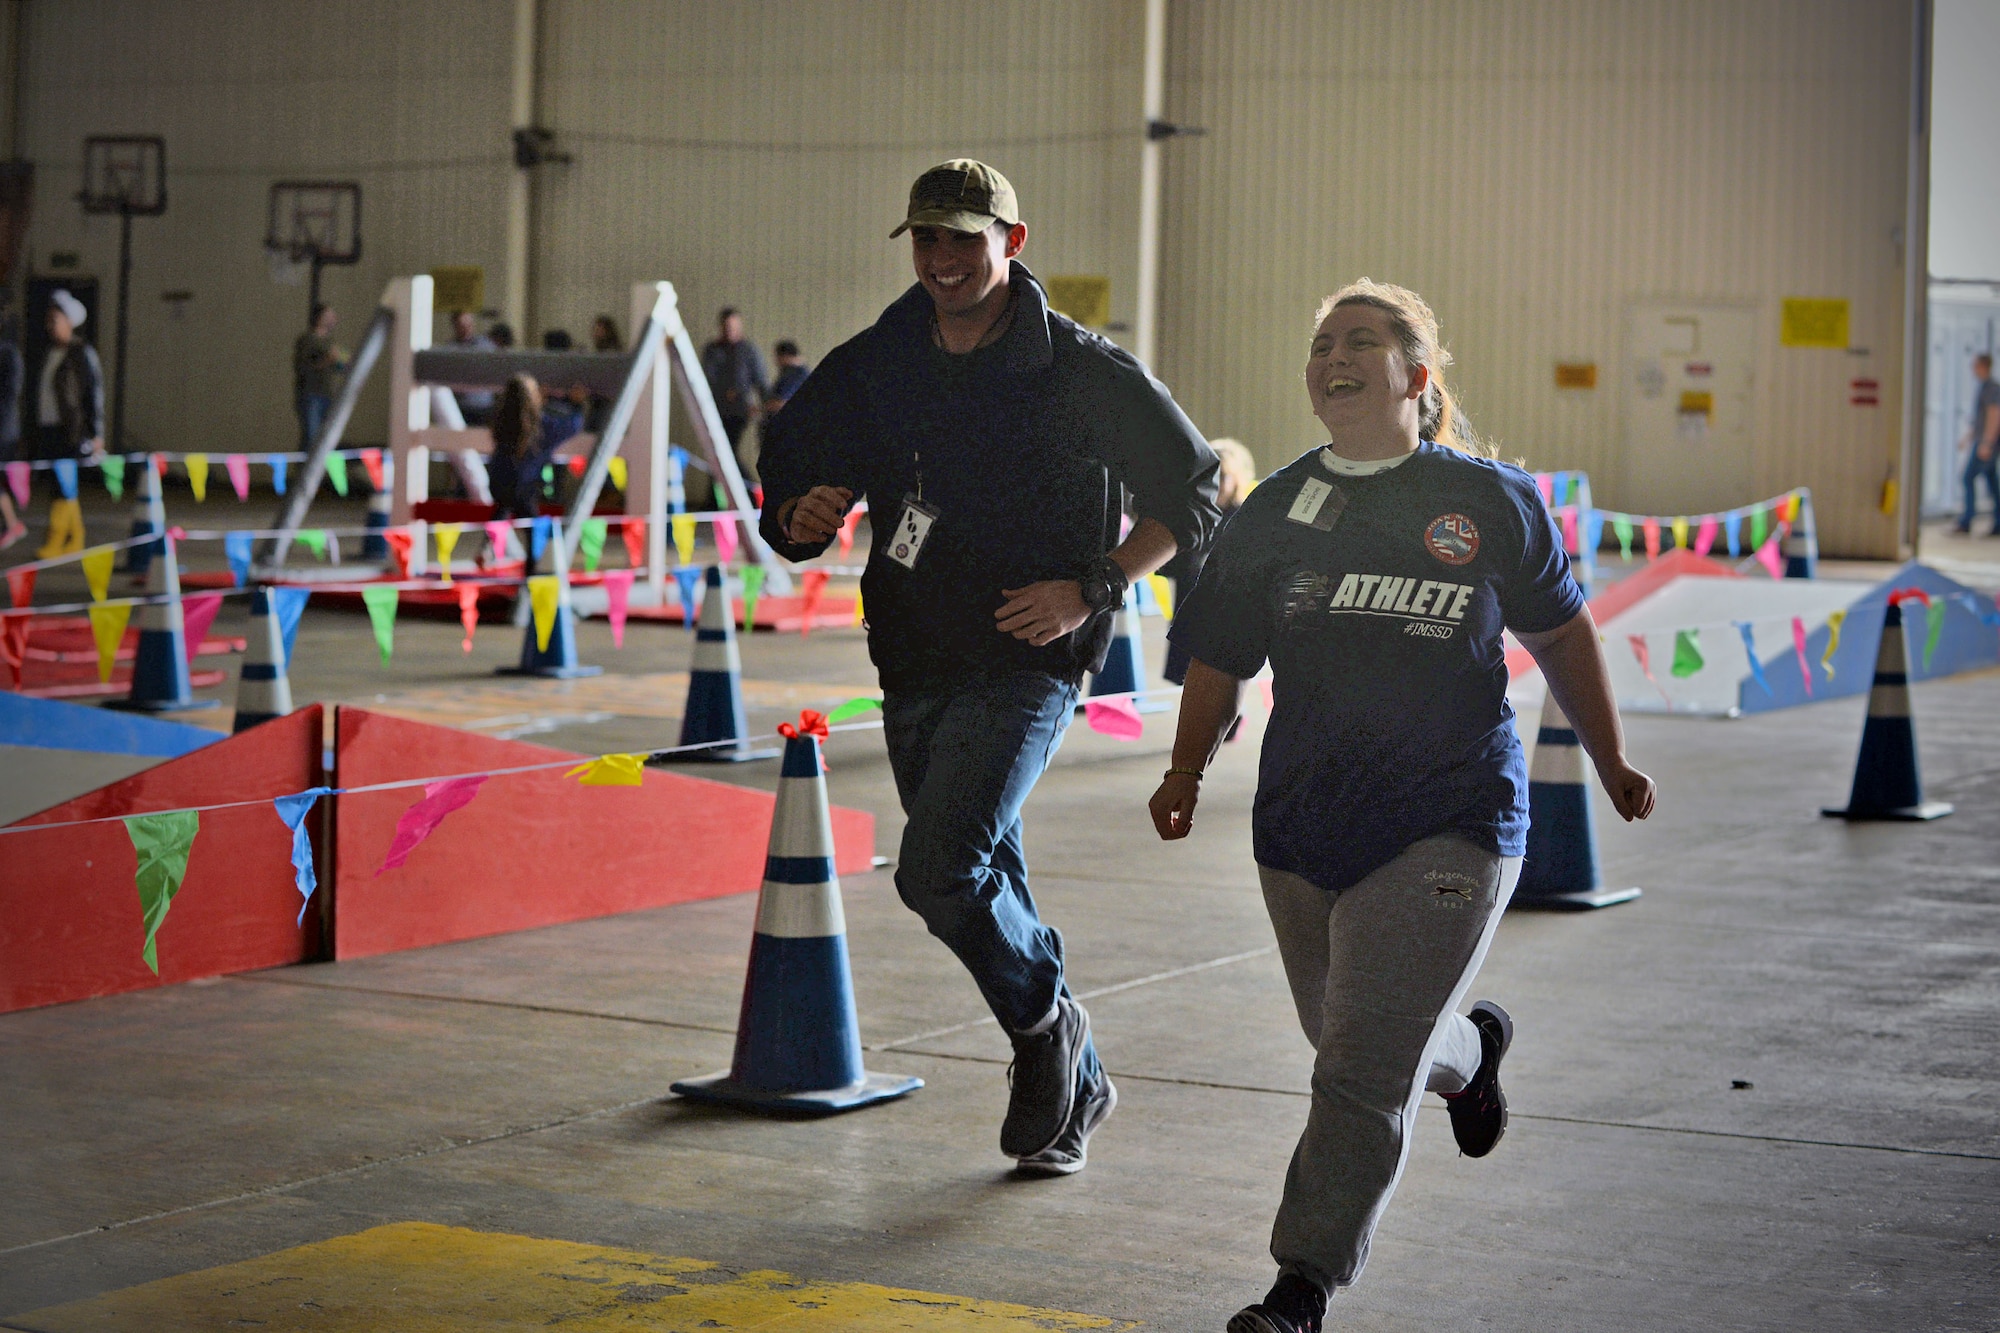 An athlete and her escort race against one another during 100-yard race at the Joan Mann Special Sports Day, Sept. 23, 2017, on RAF Mildenhall, England. The event included an obstacle course, basketball shoot-out, ball toss and other competitions for the athletes. (U.S. Air Force photo by Senior Airman Christine Groening)